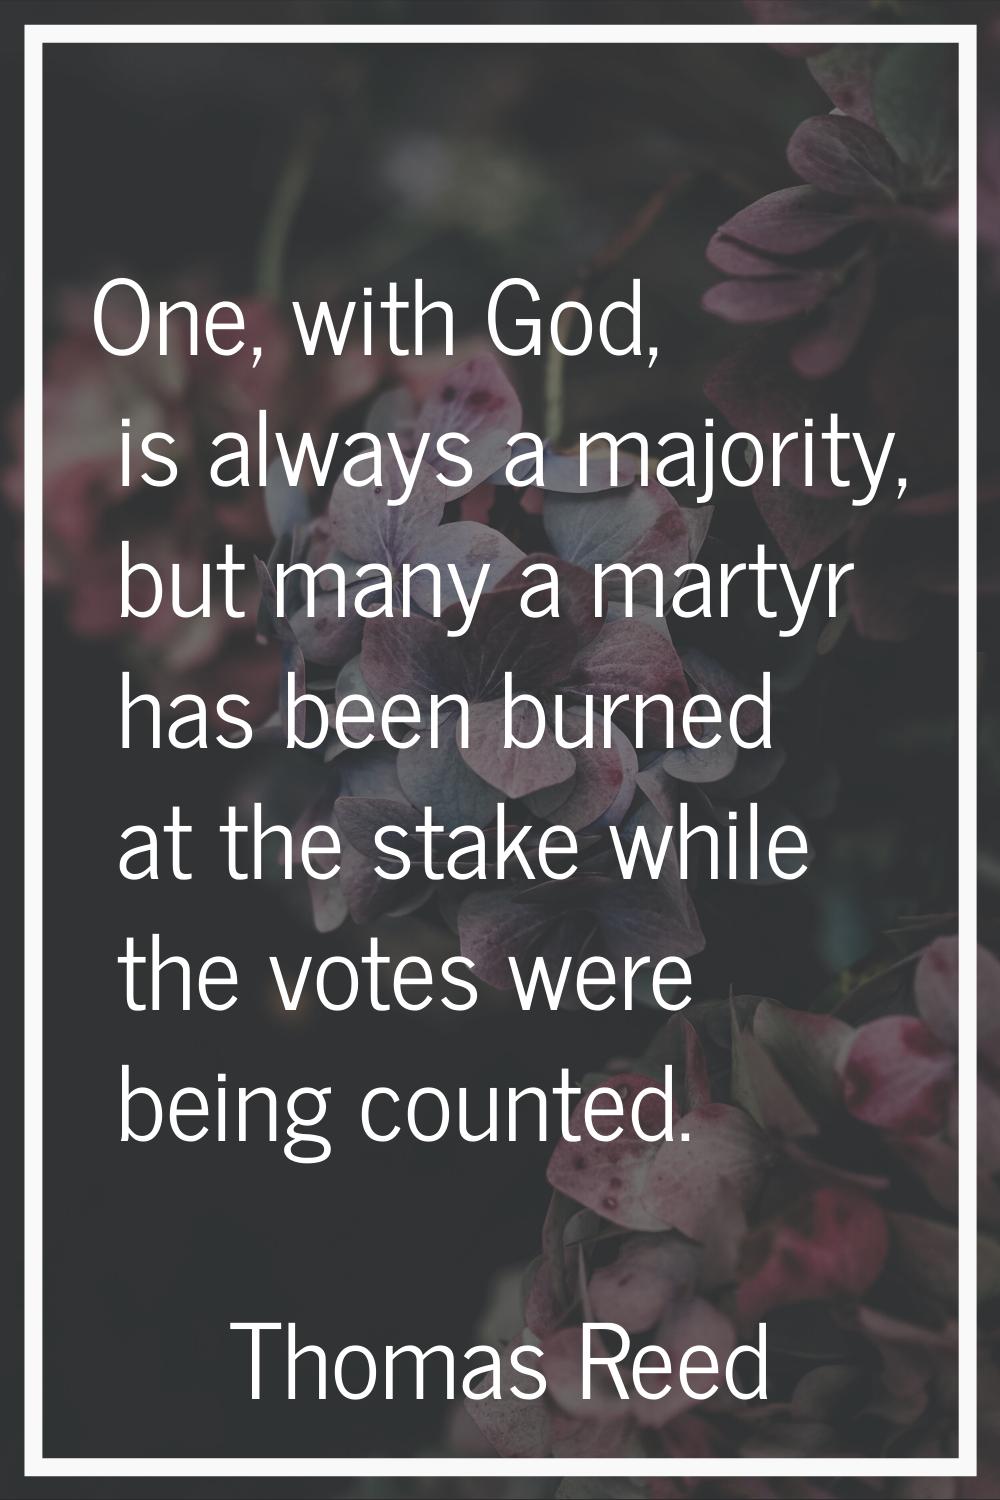 One, with God, is always a majority, but many a martyr has been burned at the stake while the votes